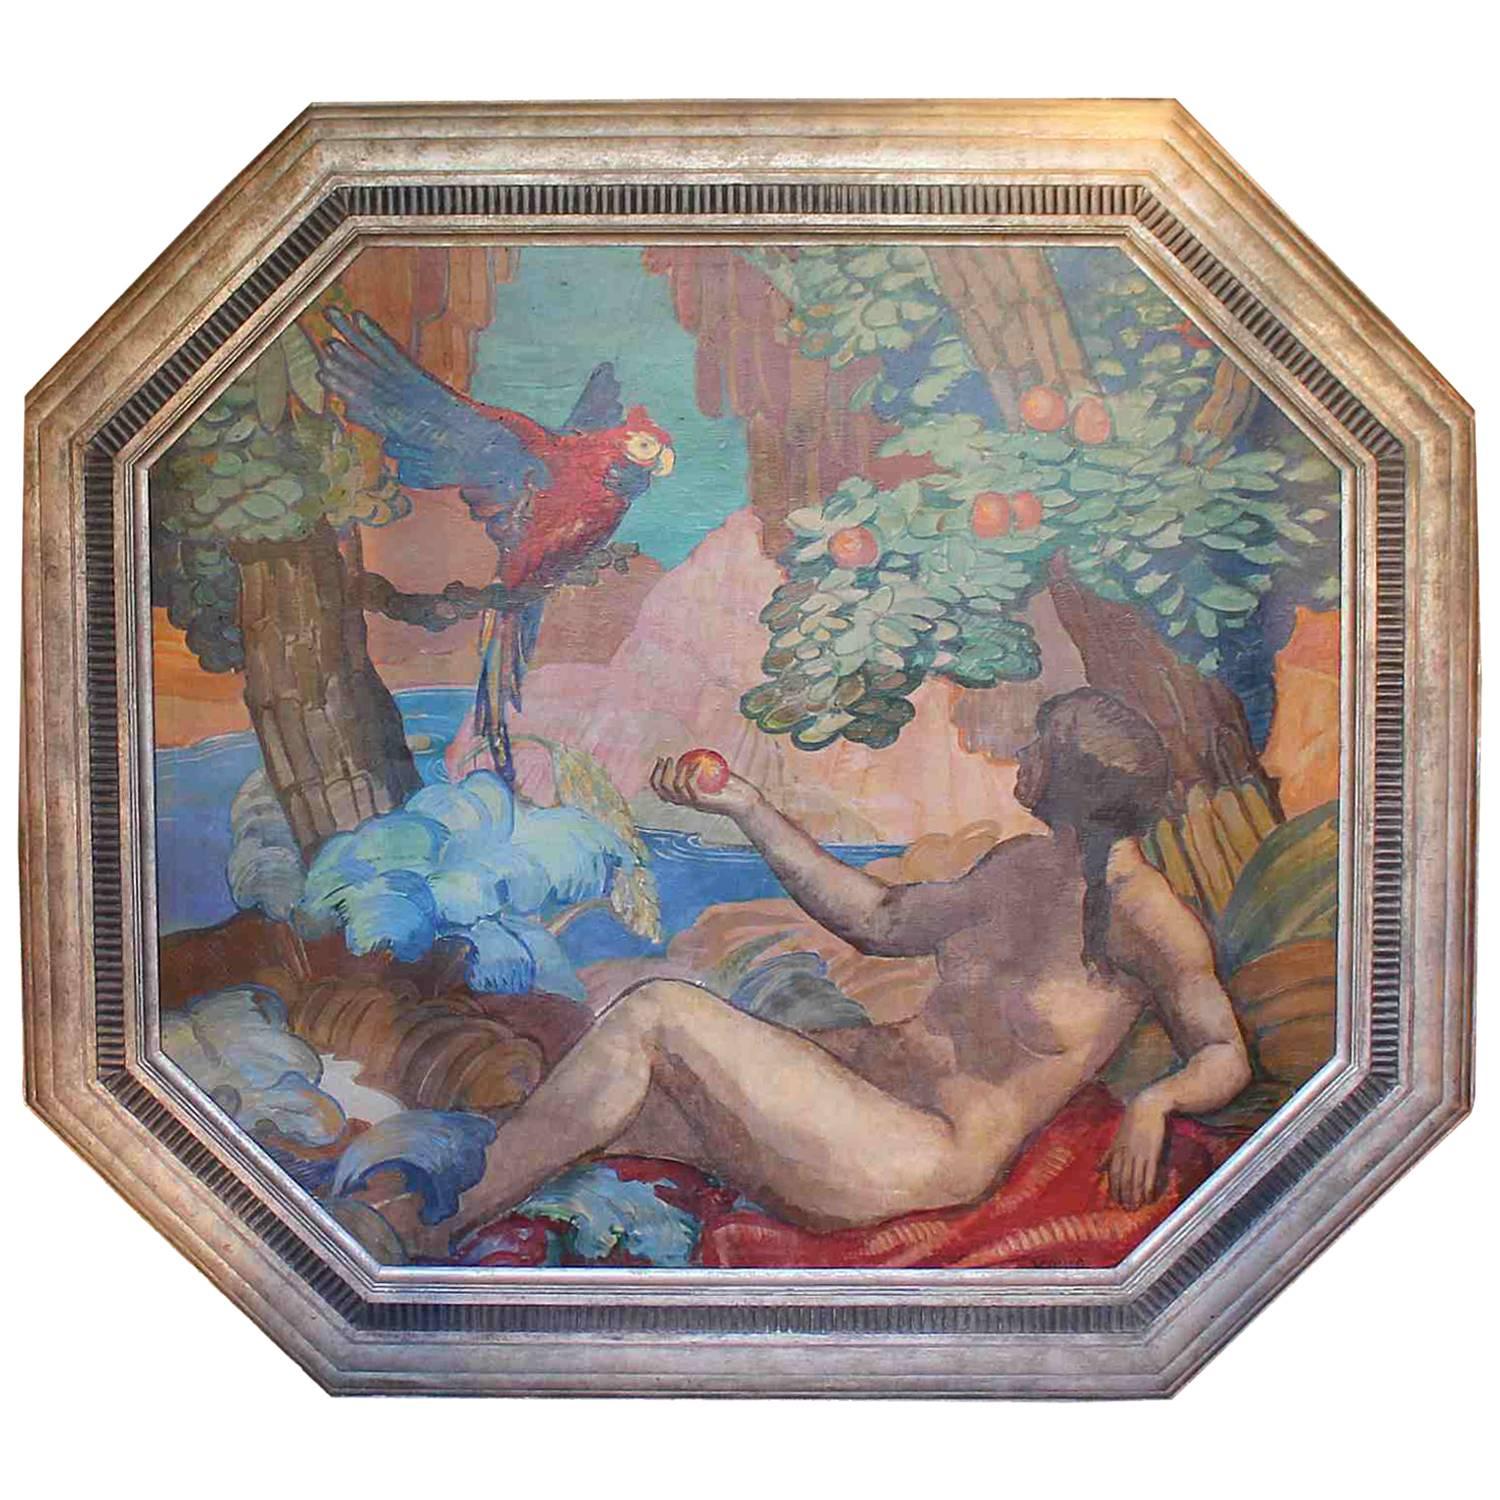 Paradise, an Art Deco Painting by Puig